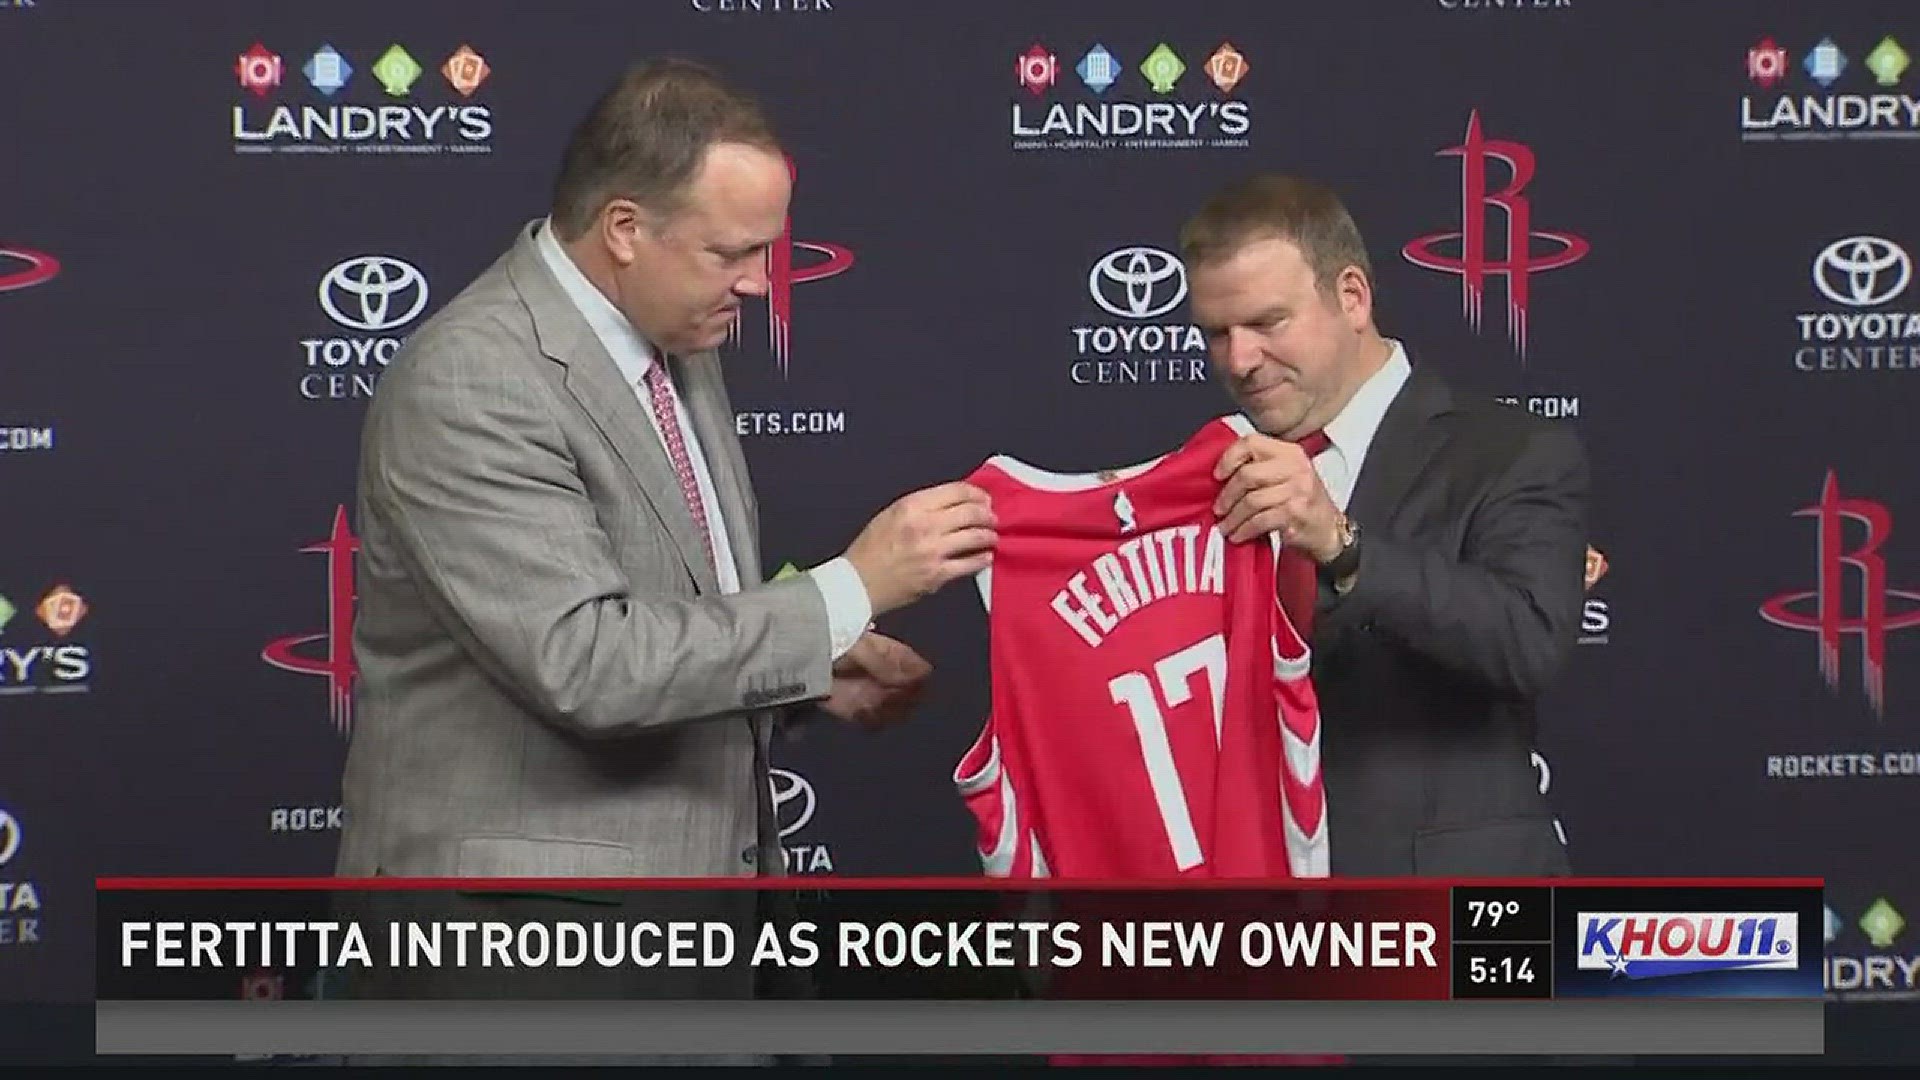 Tilman Fertitta was introduced Tuesday as the new owner of the Houston Rockets.